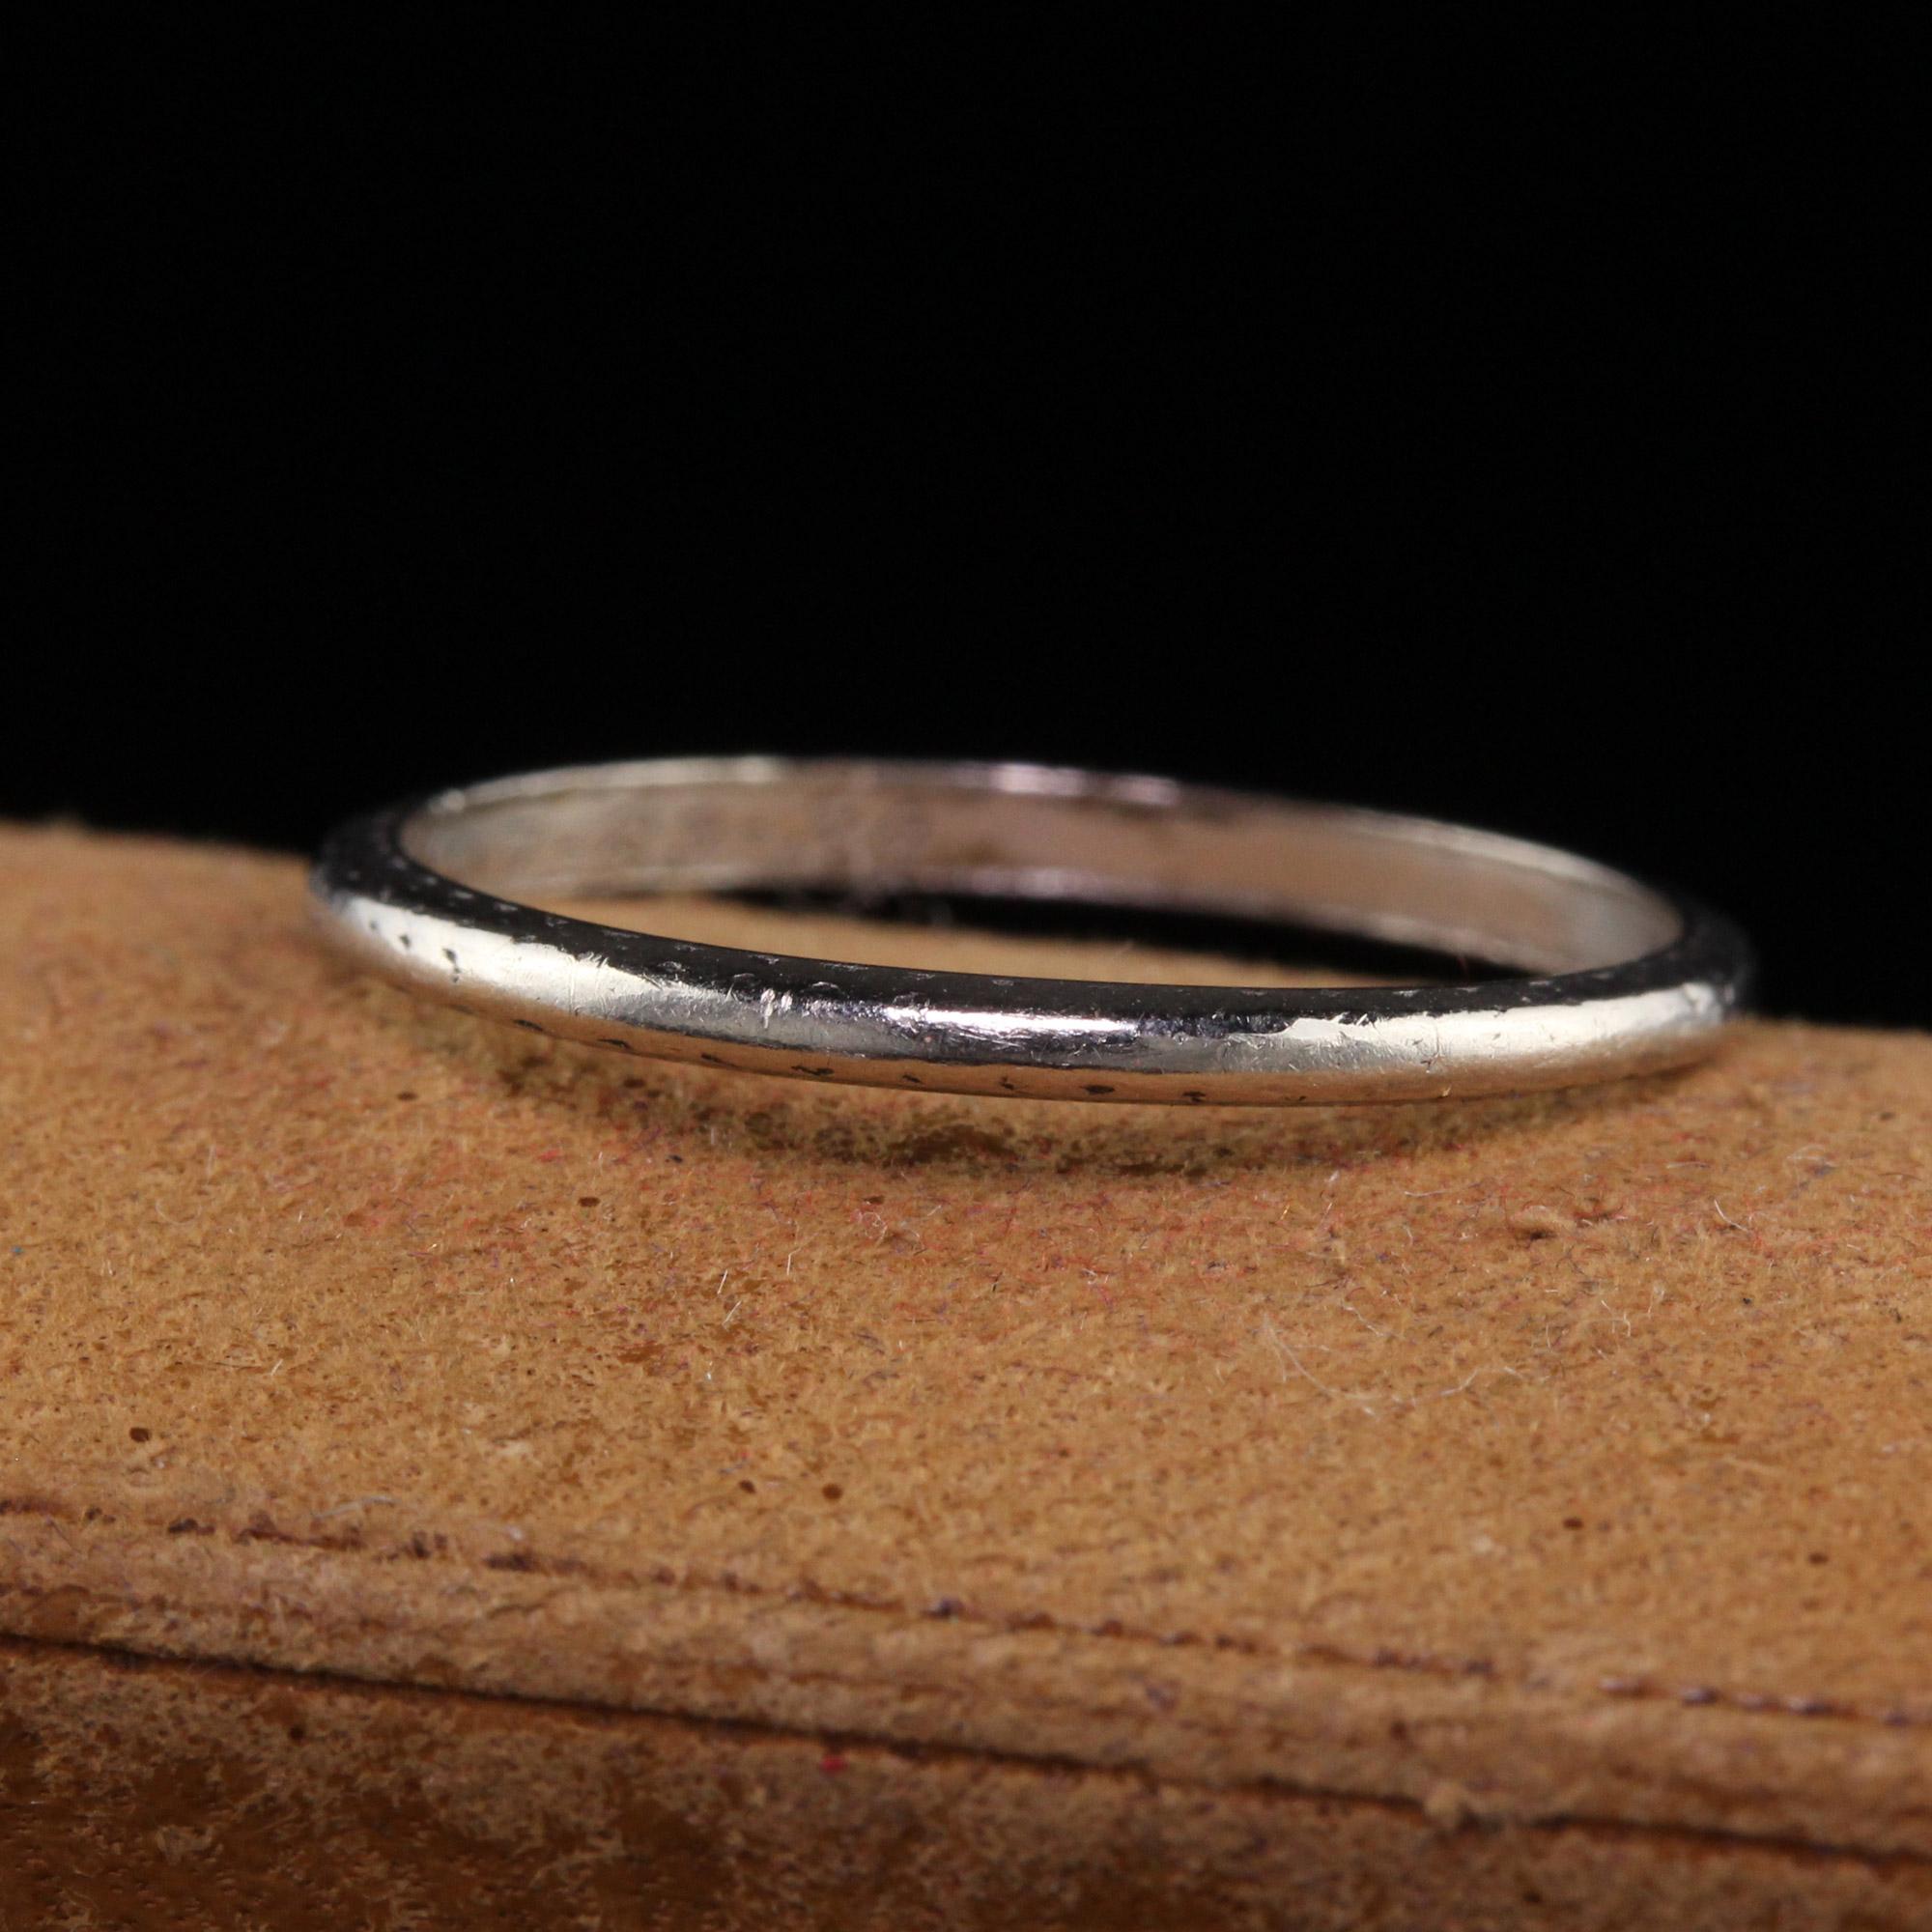 Beautiful Antique Art Deco Platinum Engraved Wedding Band - Size 5 1/4. This classic wedding band is crafted in platinum. The sides of the wedding band are faintly engraved and can be stacked with other thin bands. The ring is in good condition and